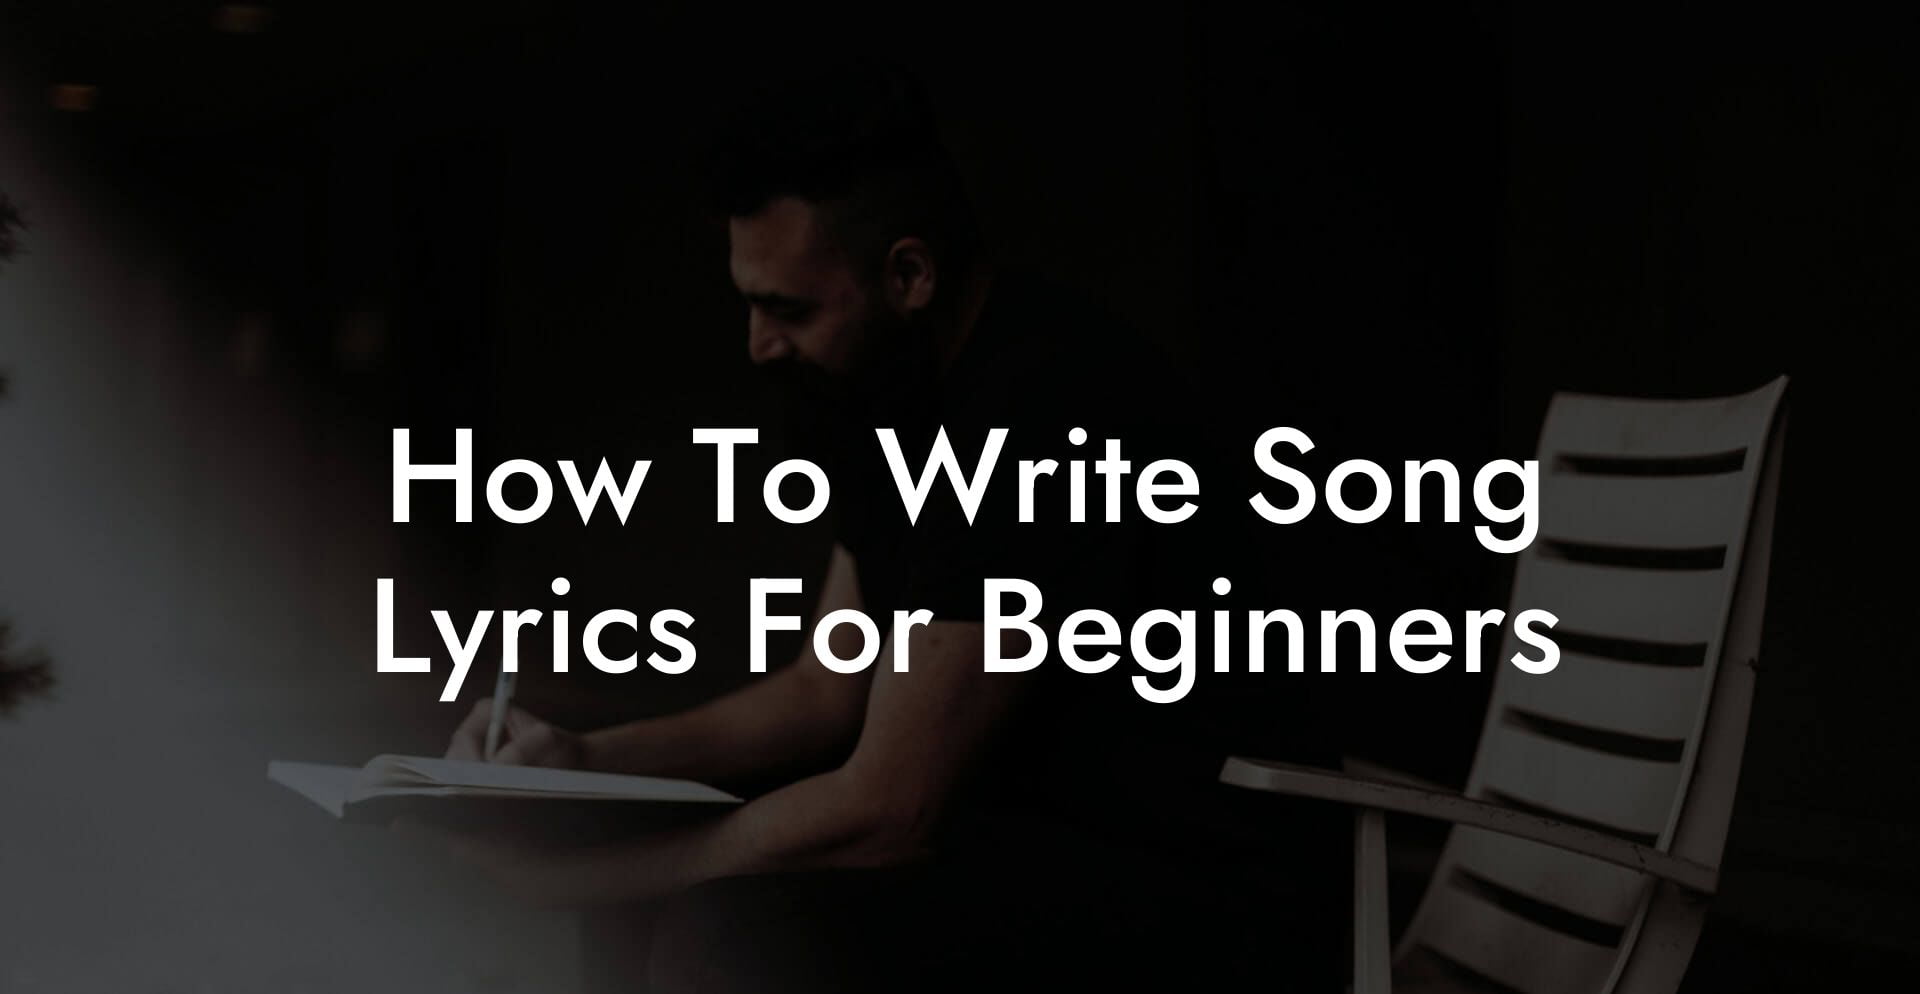 how to write song lyrics for beginners lyric assistant